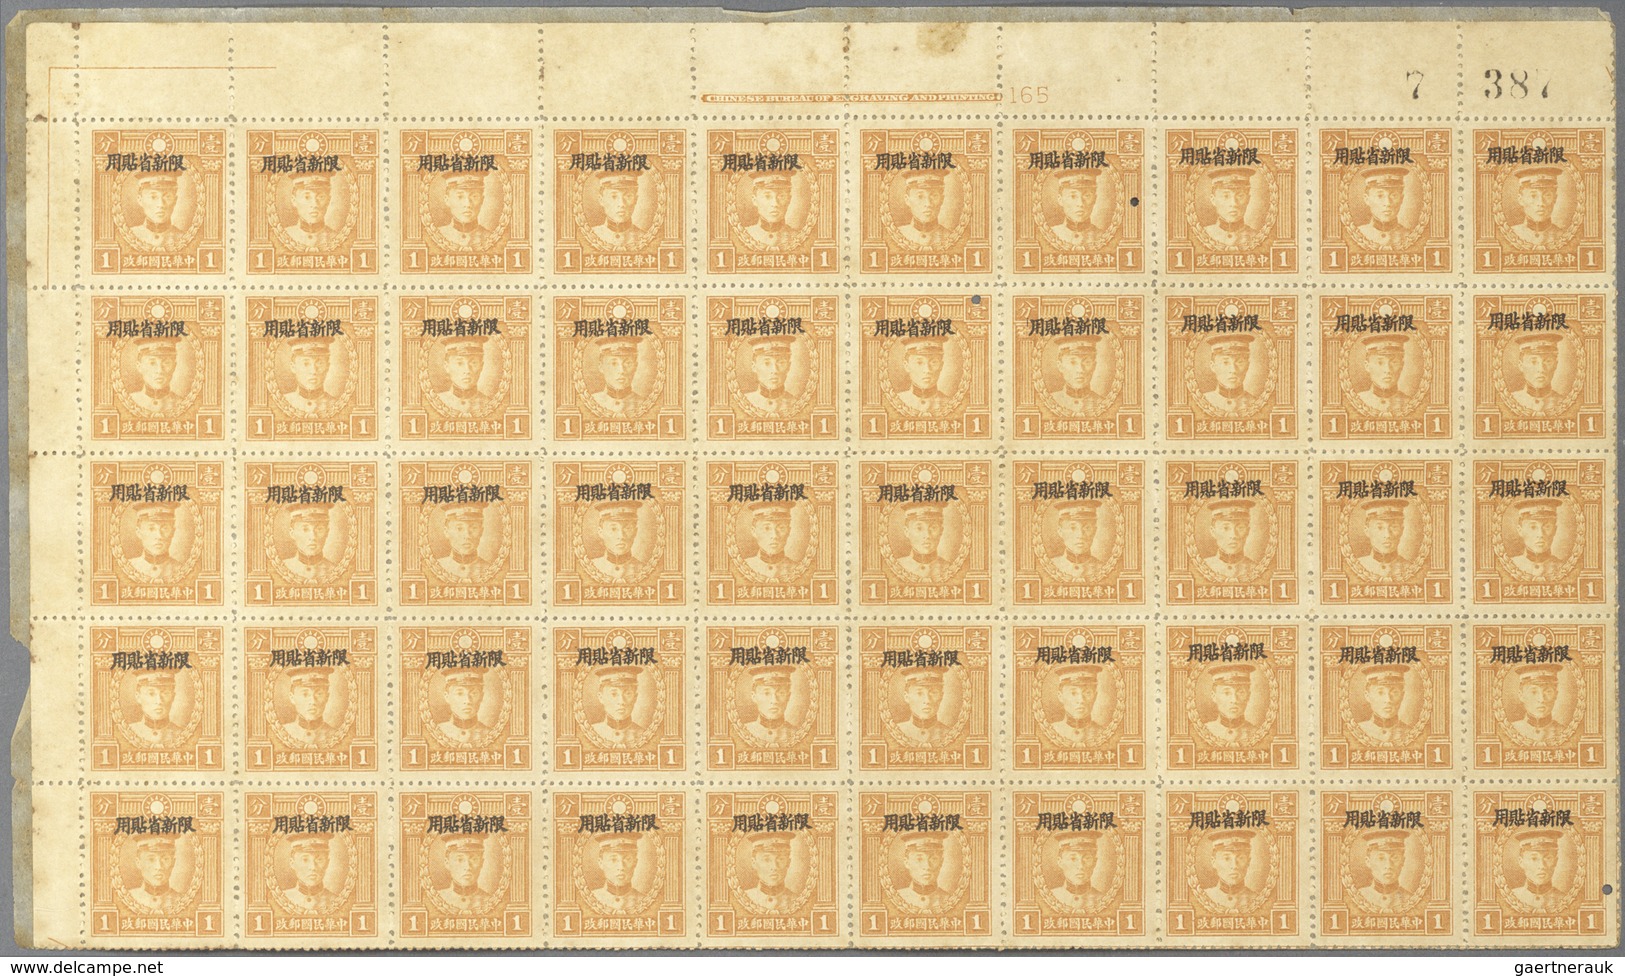 China: 1935-48, Accumulition Of Small Values In Sheets And Blocks Including Republic Issues 1944-47, - 1912-1949 Repubblica